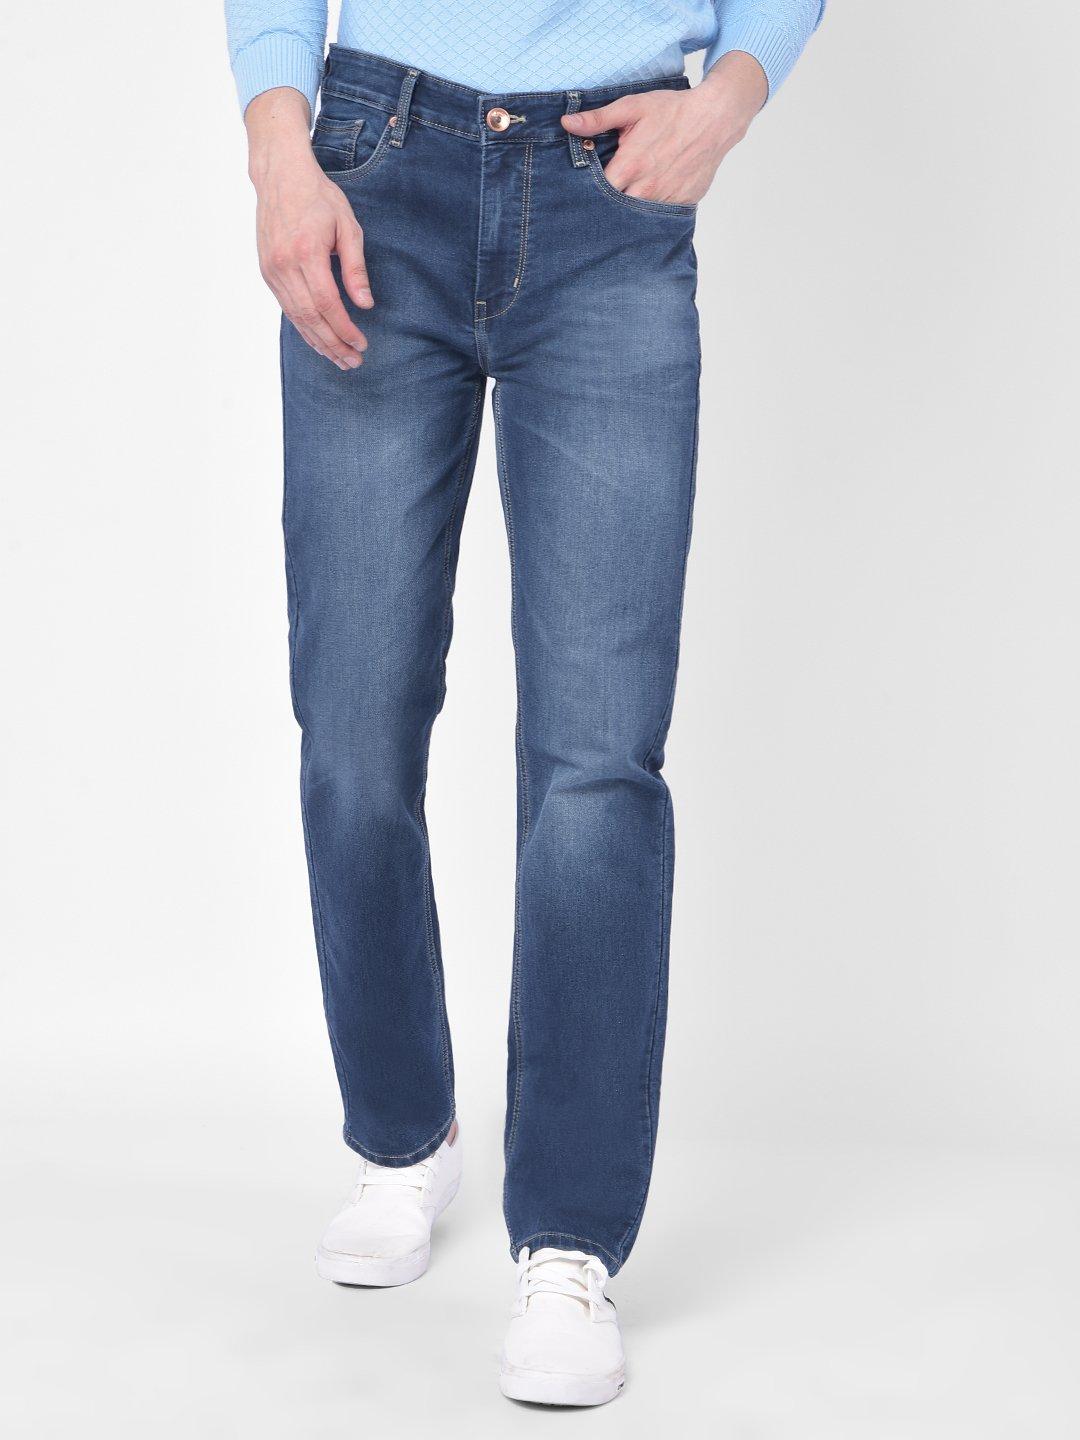 Men's Slim Fit Jeans, Waist Size: 32 And 36 at Rs 450/piece in Vasai Virar